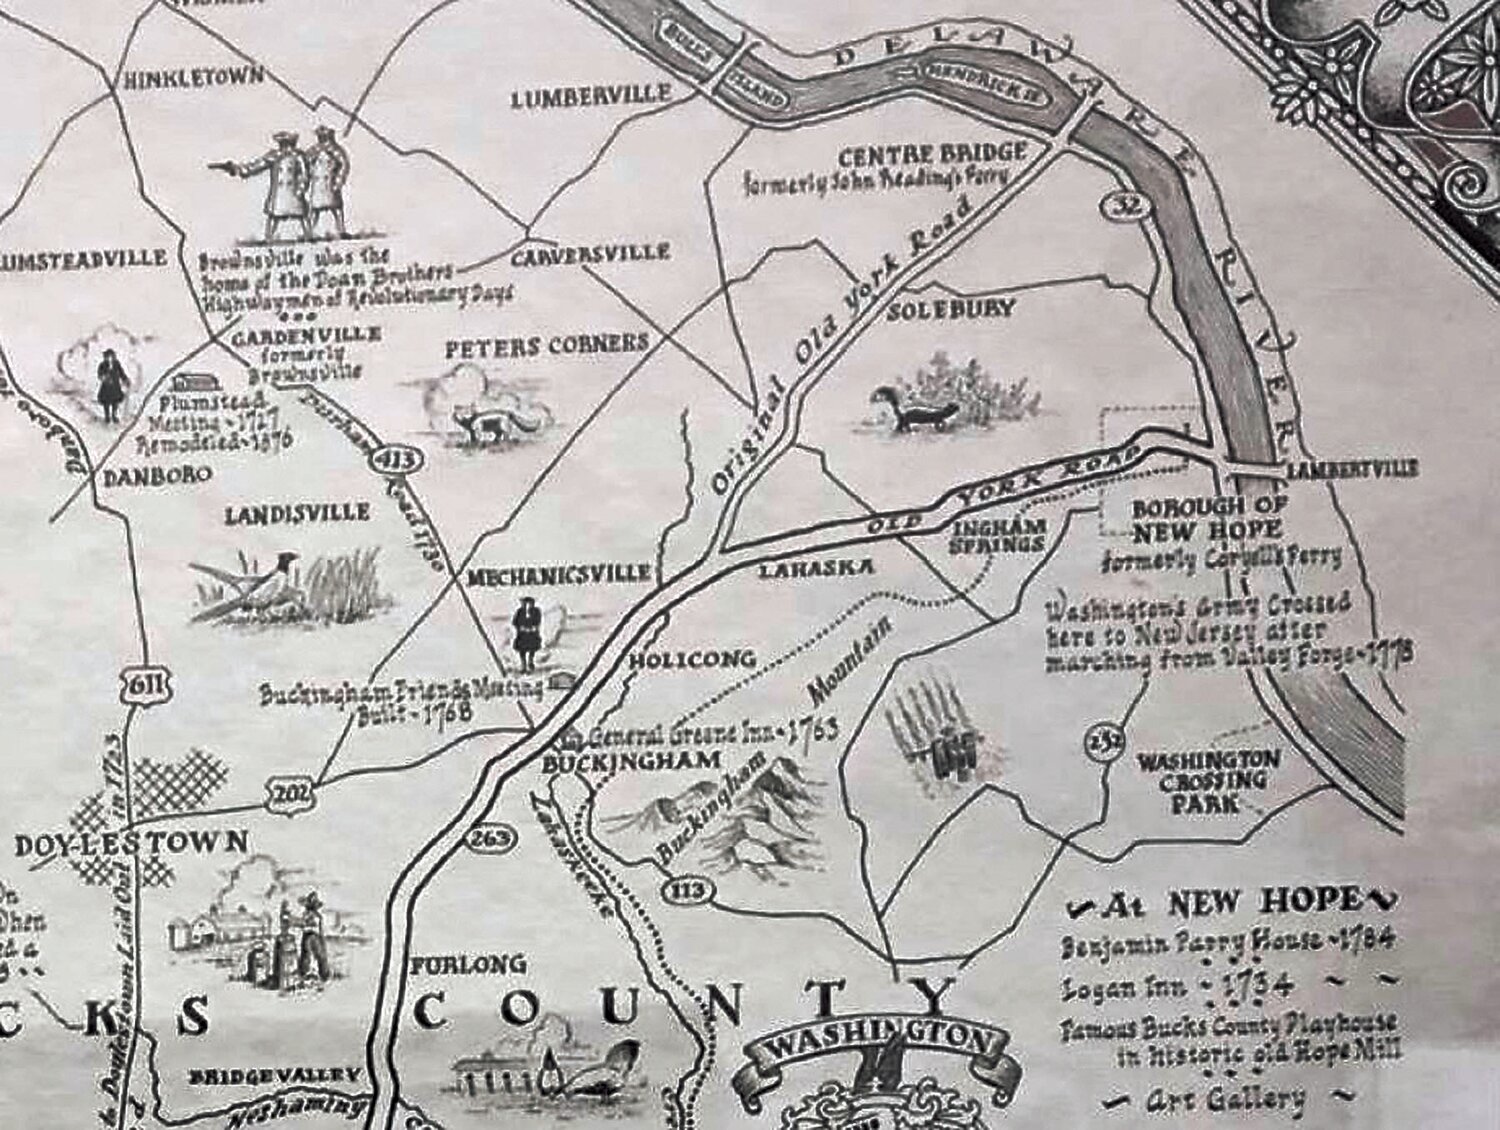 This 1941 map shows where the original Old York Road reached the Delaware River in Centre Bridge (formerly John Reading’s Ferry) and the rerouted Old York Road, which passed instead through New Hope Borough.